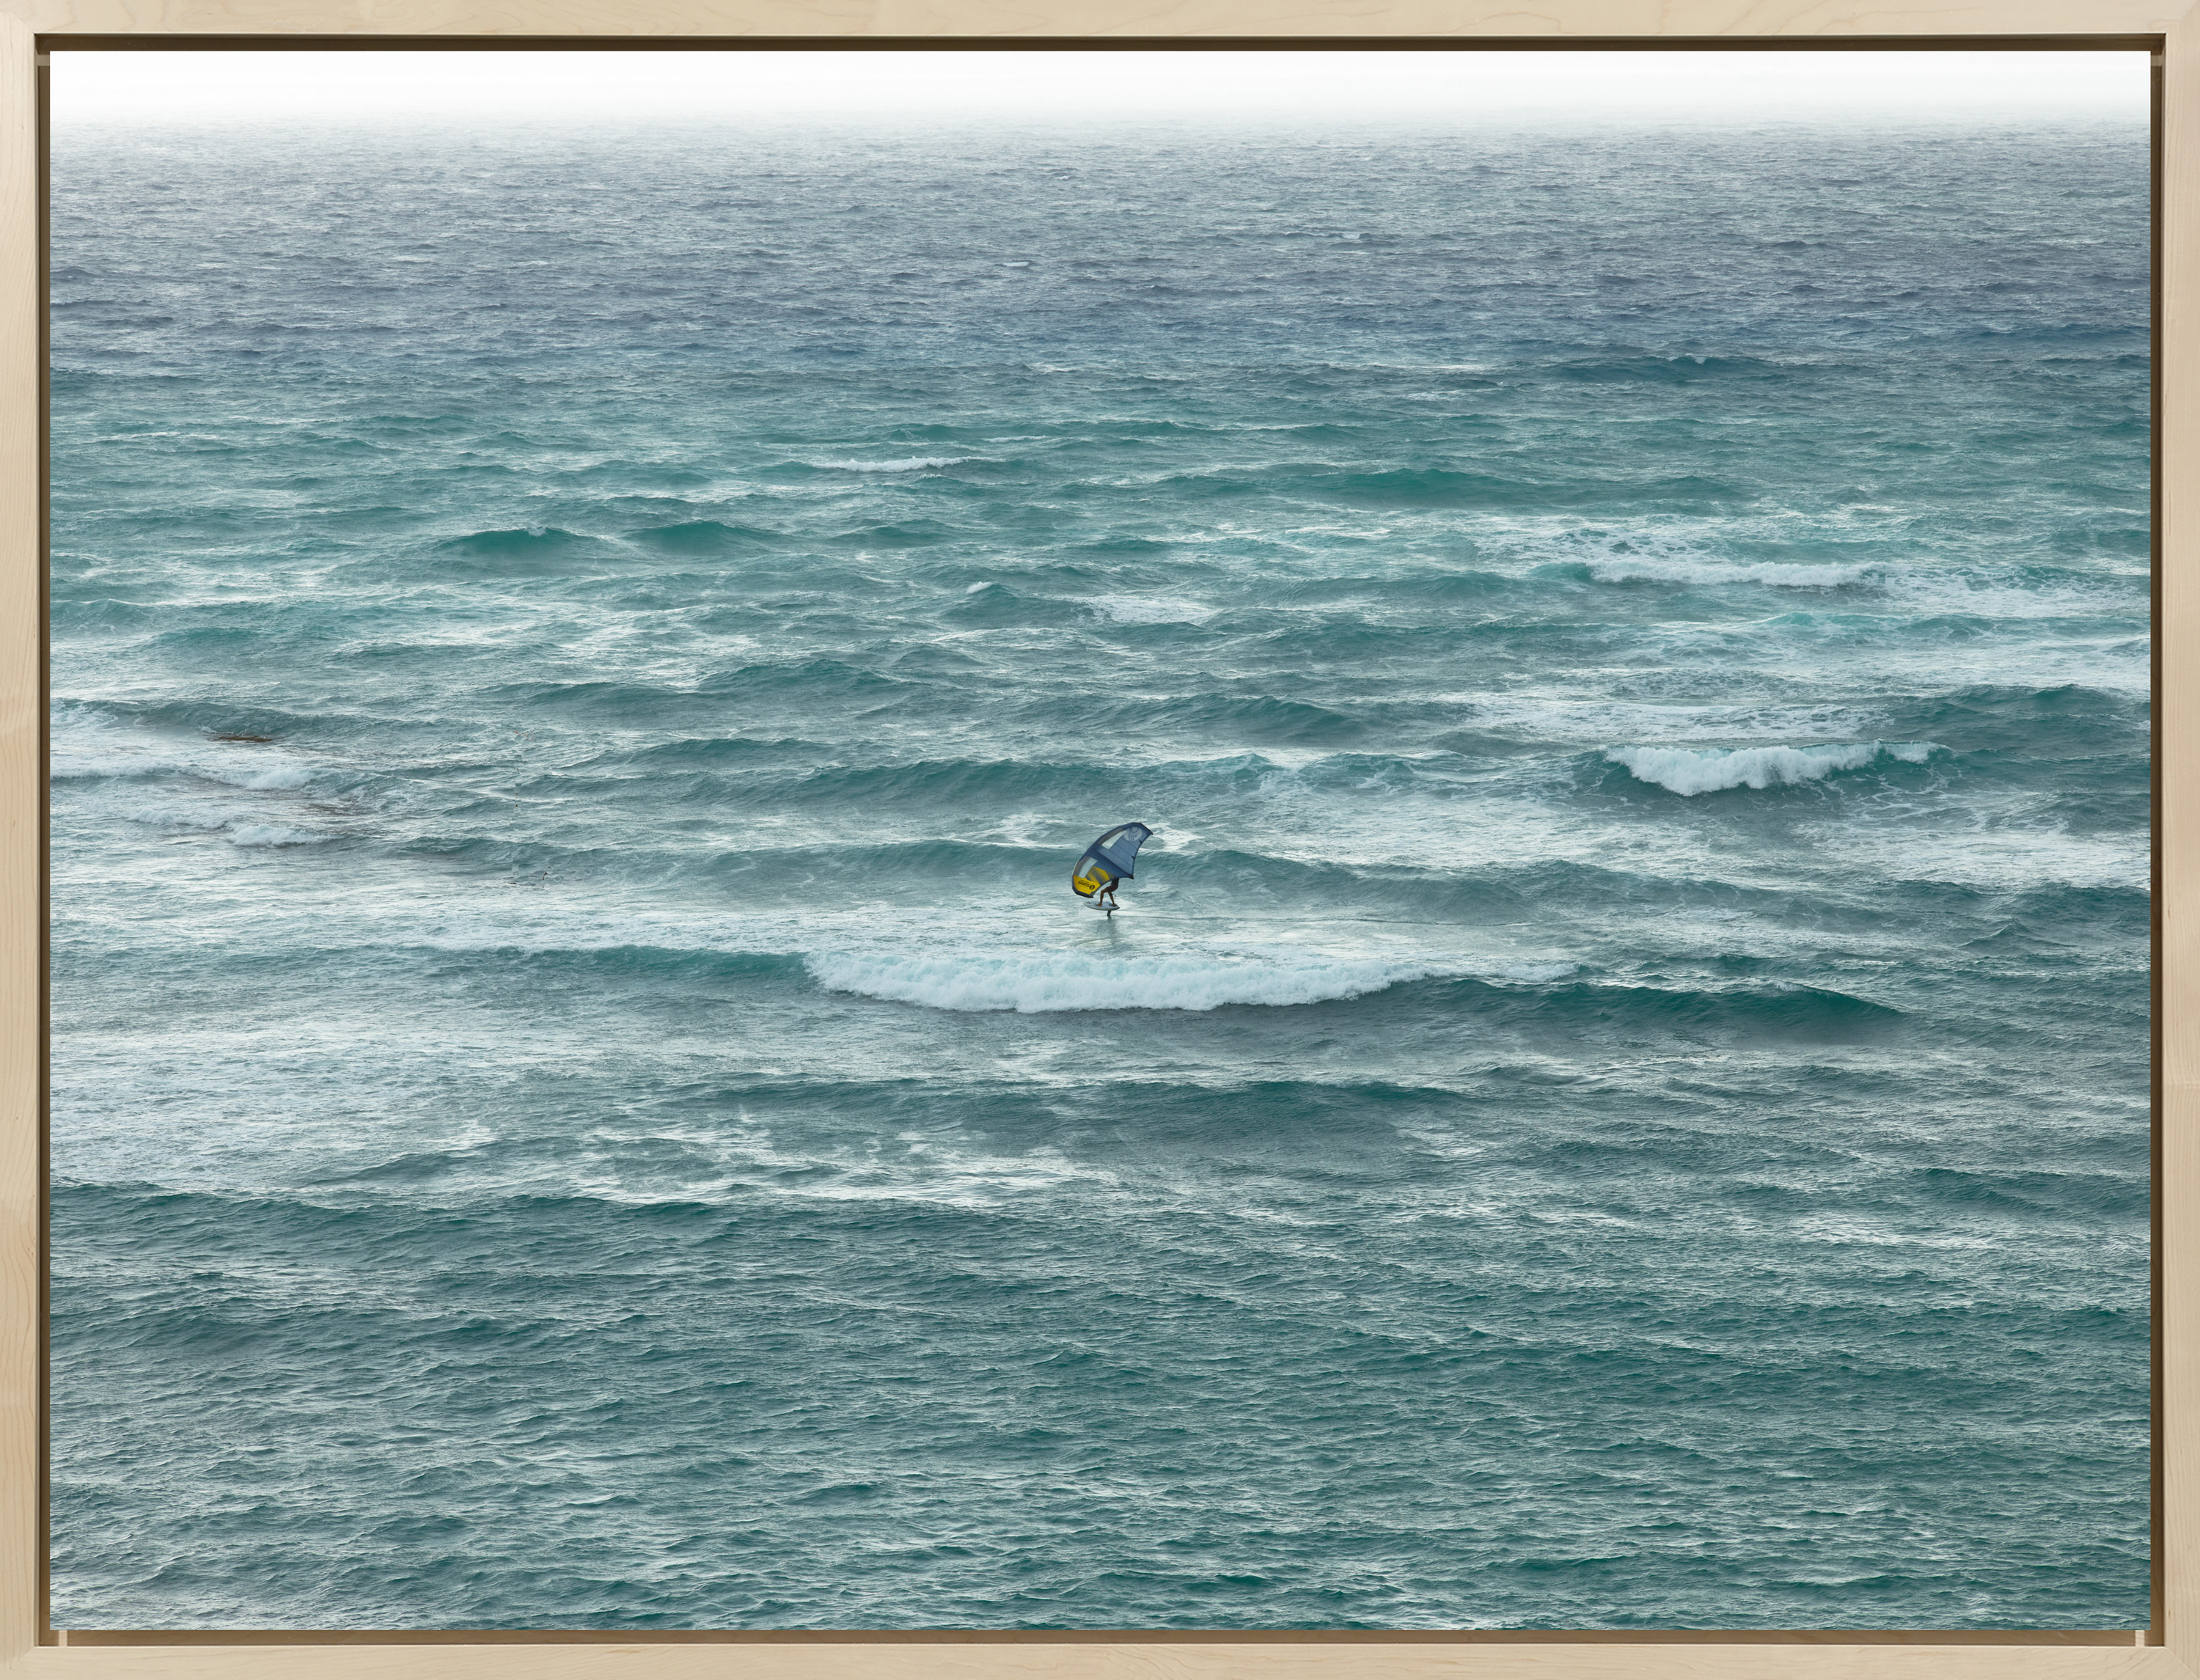 Color photograph of a windsurfer riding a wave in the middle of the ocean framed in bleached wood